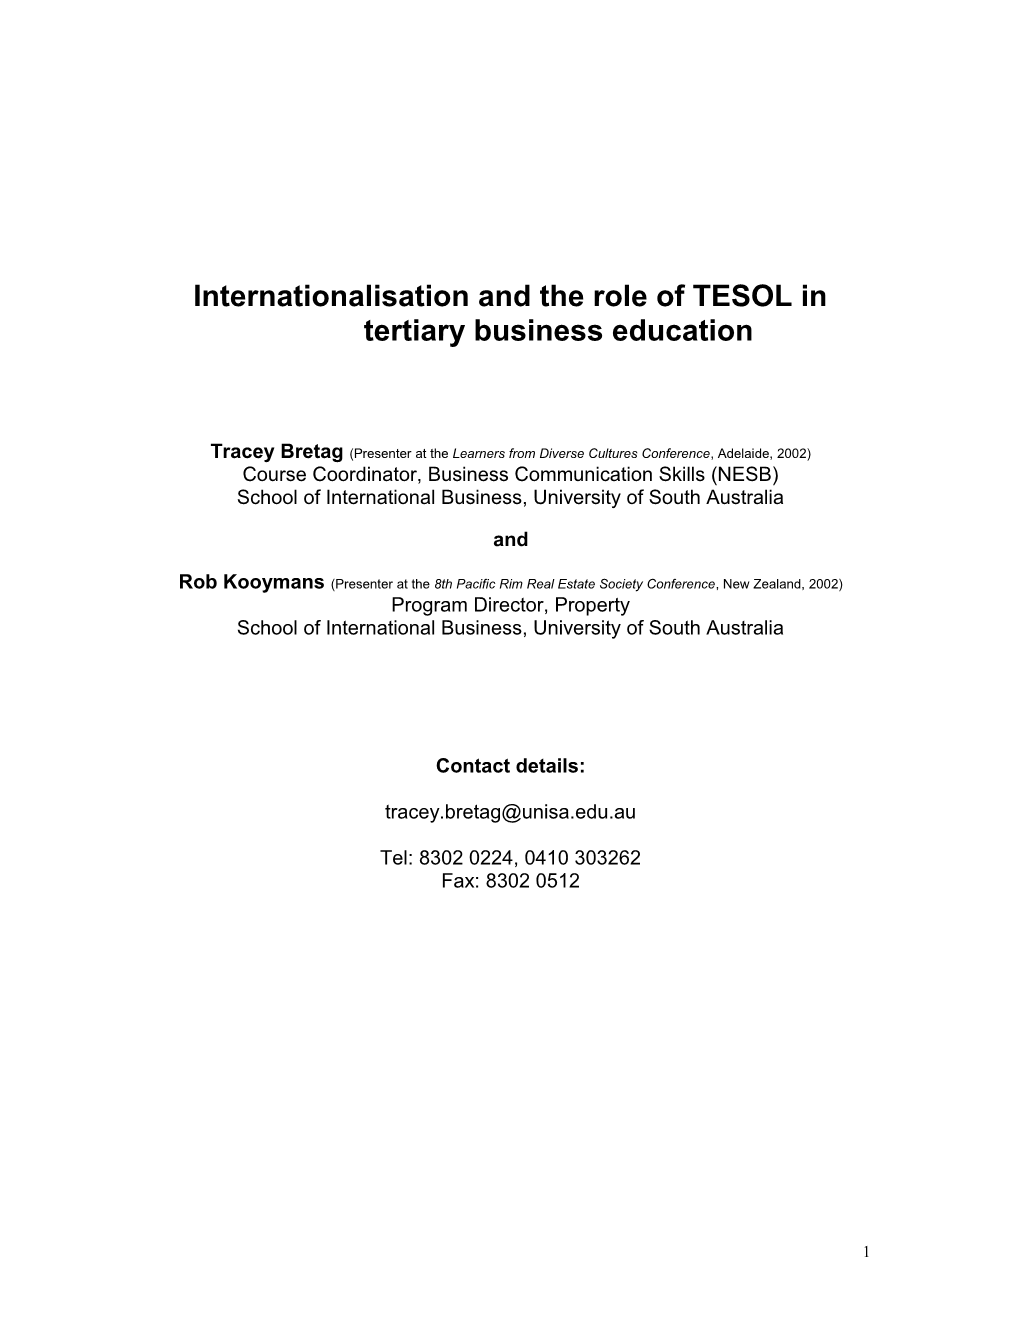 Internationalisation and the Role of TESOL in Tertiary Business Education